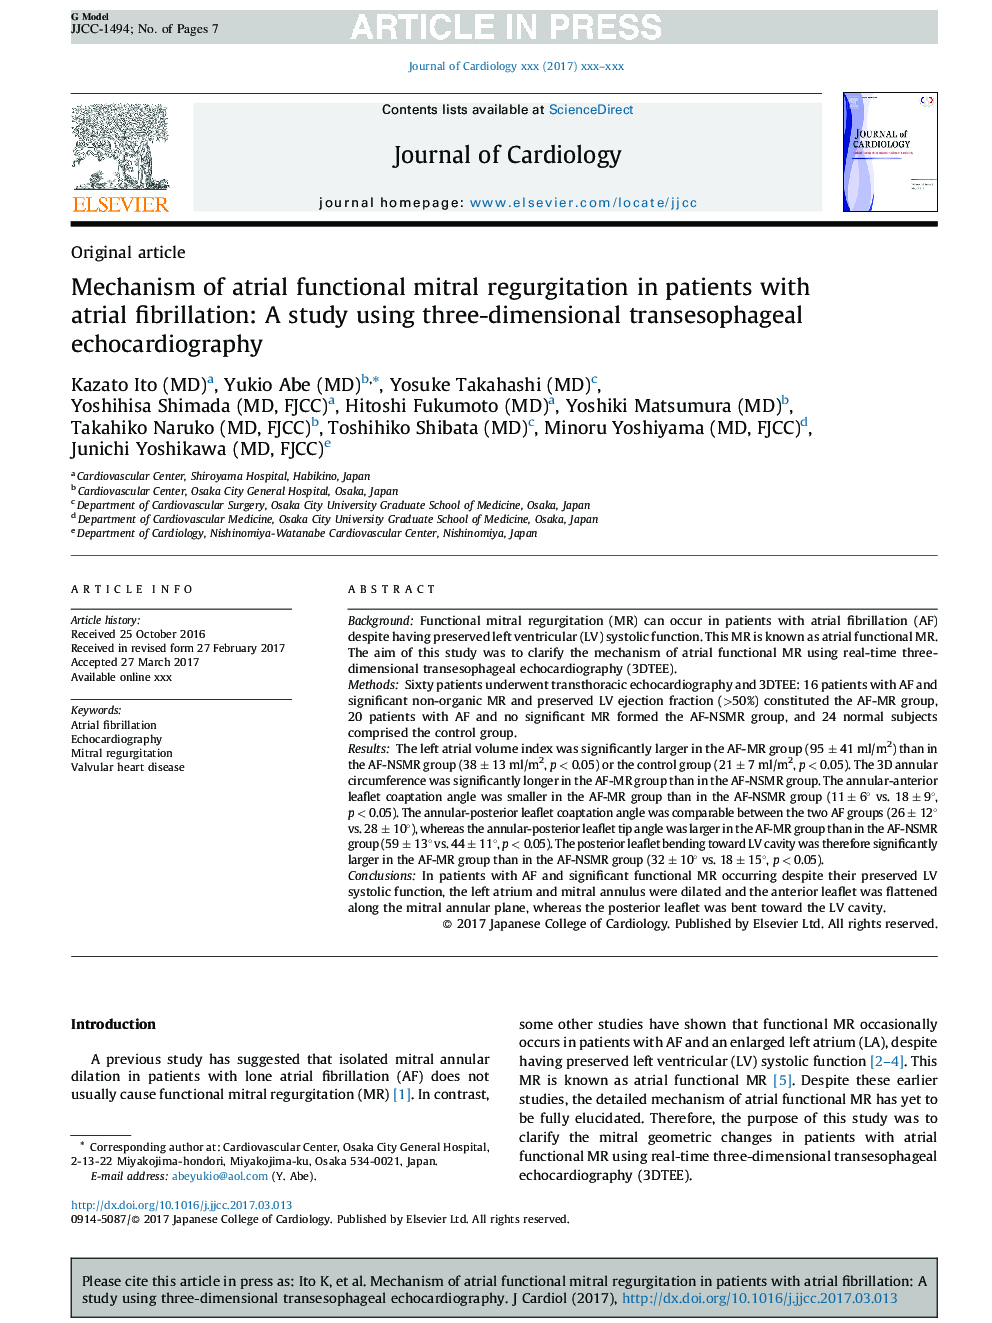 Mechanism of atrial functional mitral regurgitation in patients with atrial fibrillation: A study using three-dimensional transesophageal echocardiography